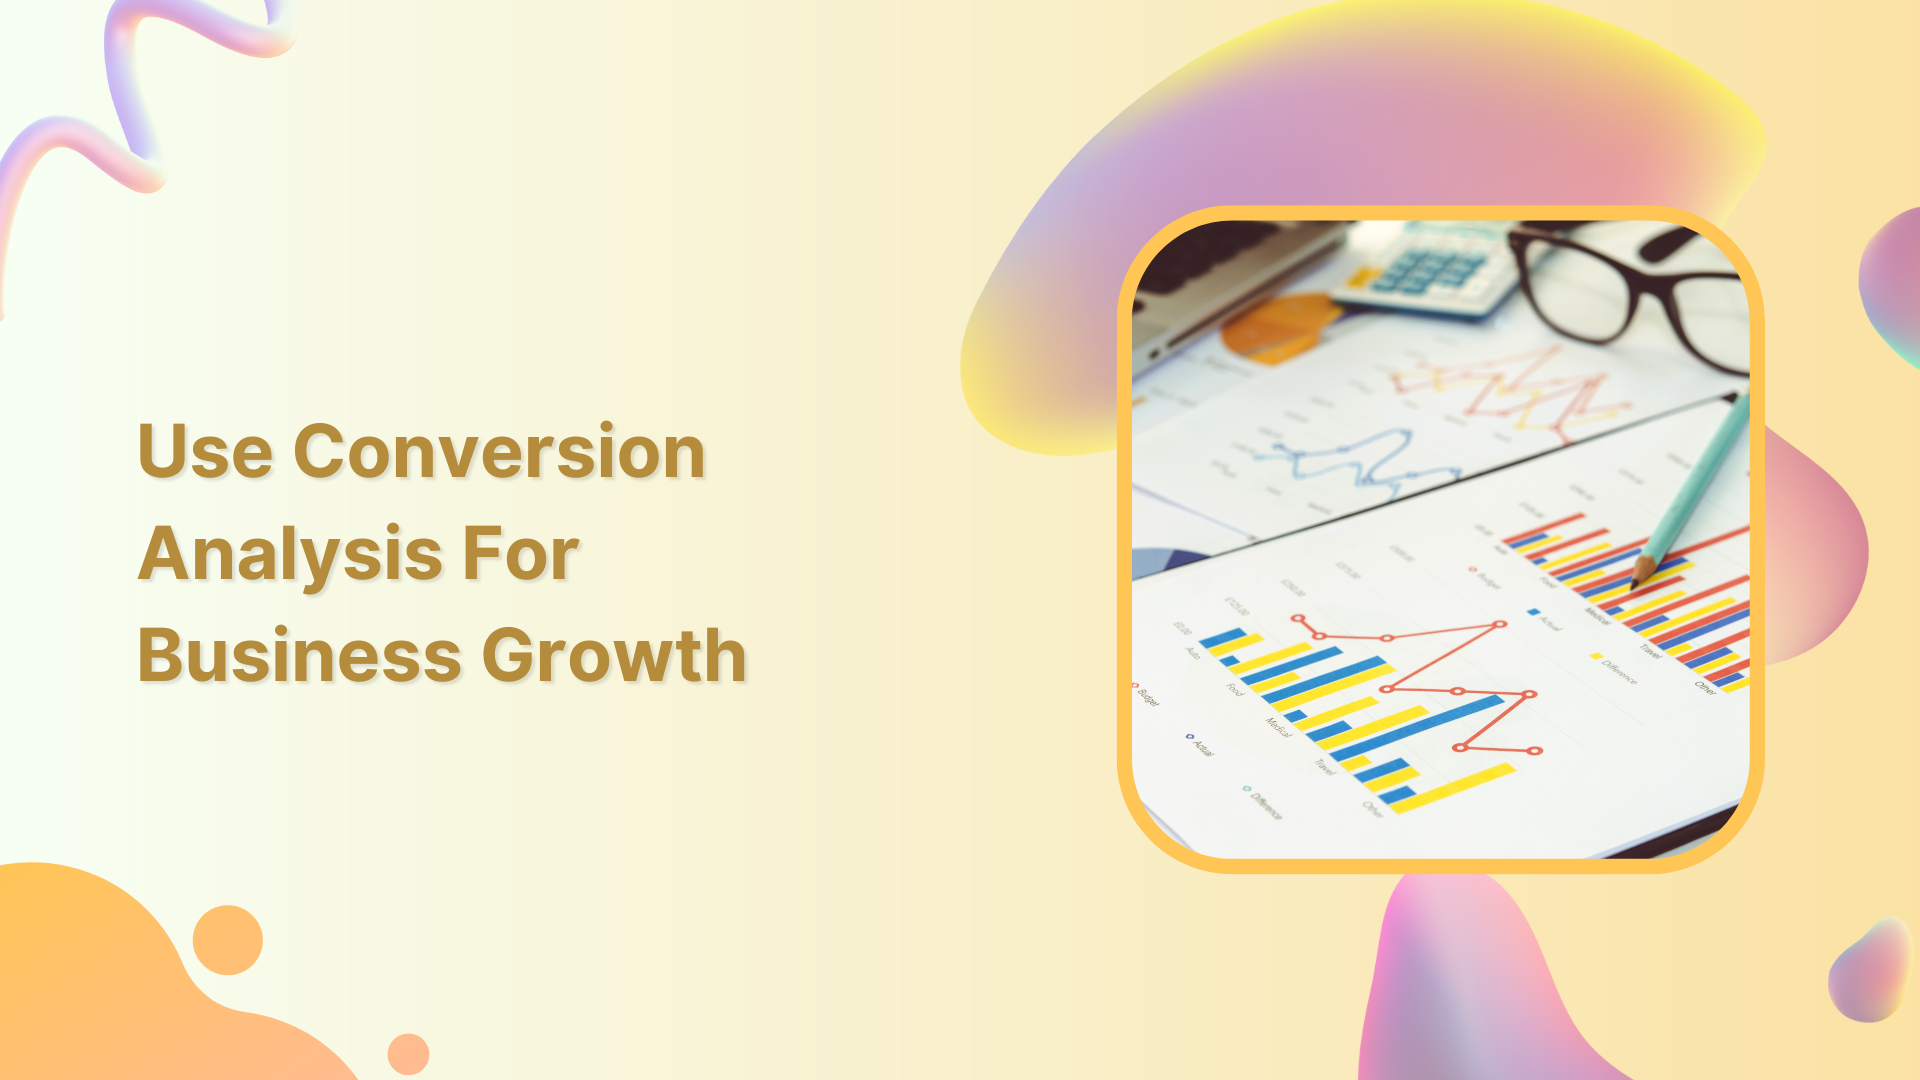 How to Use Conversion Analysis For Business Growth